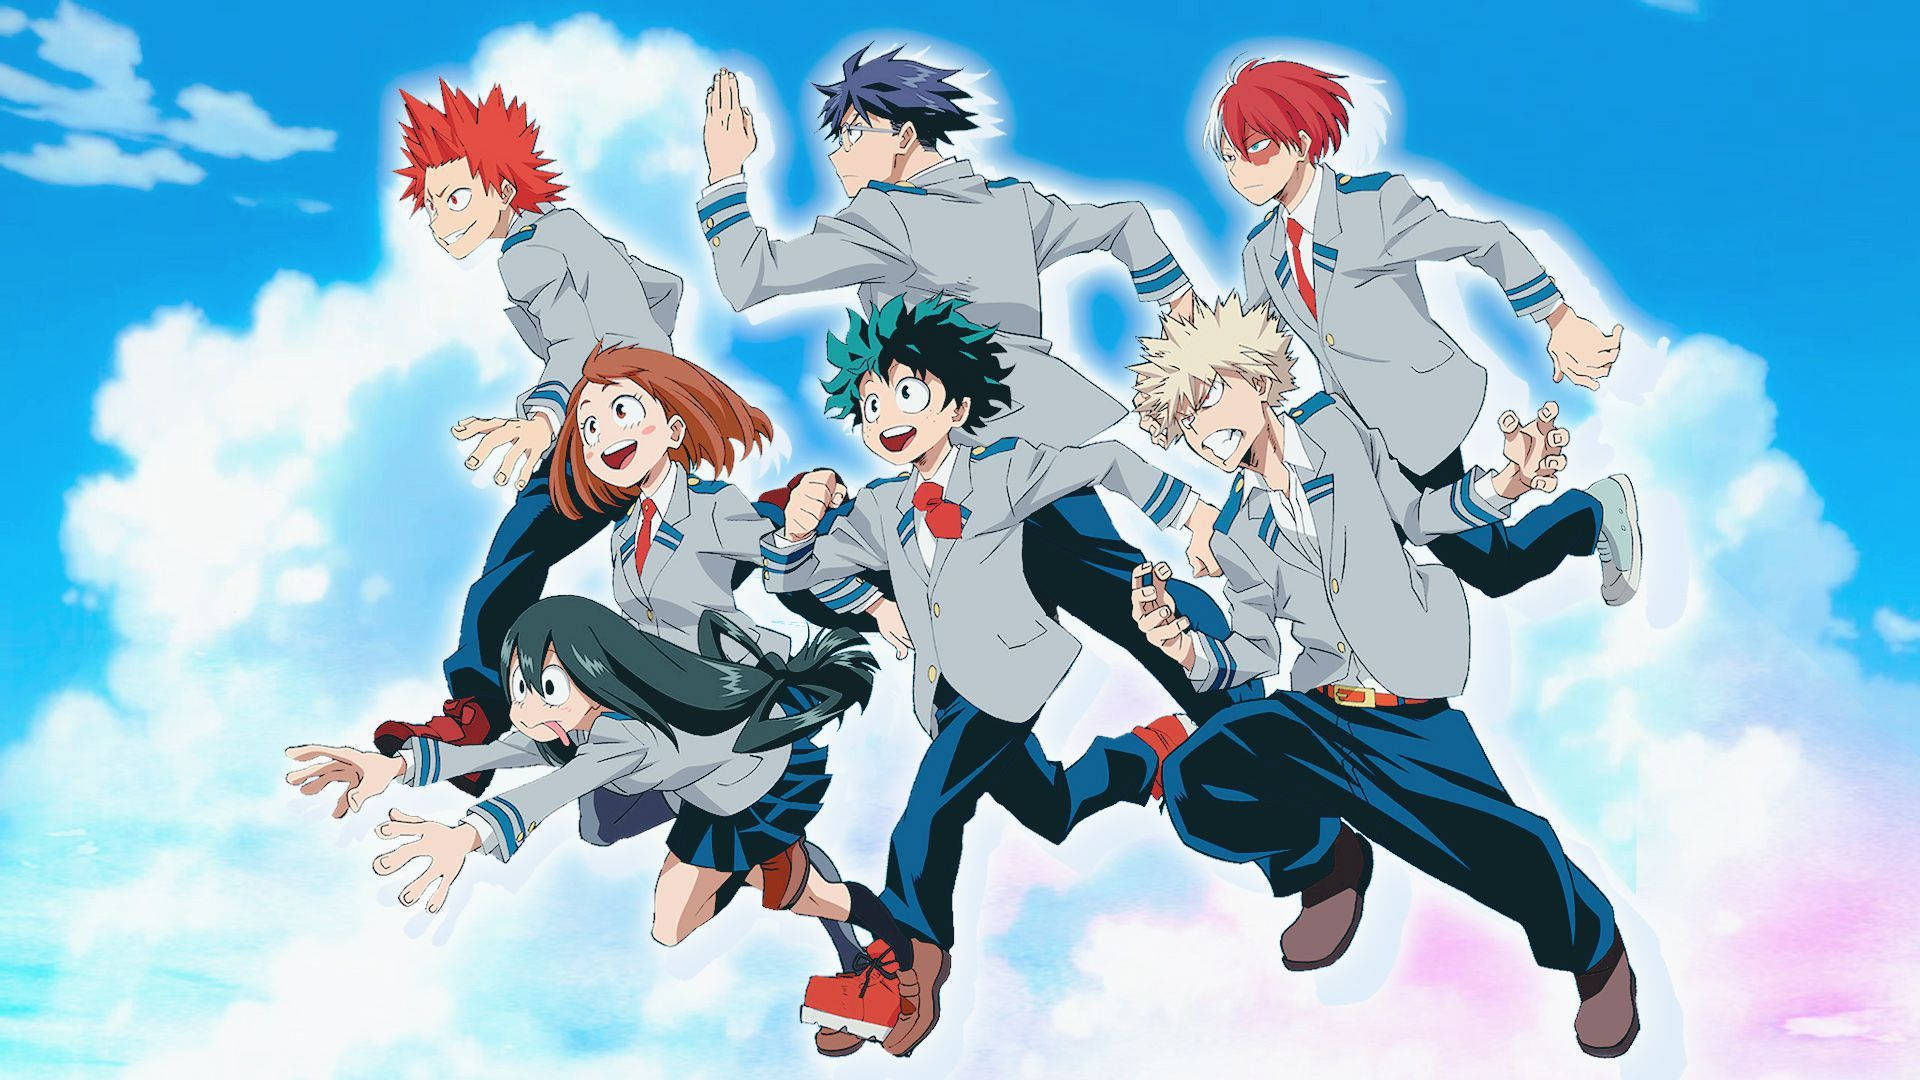 Bnha Class 1-a Student Characters Background